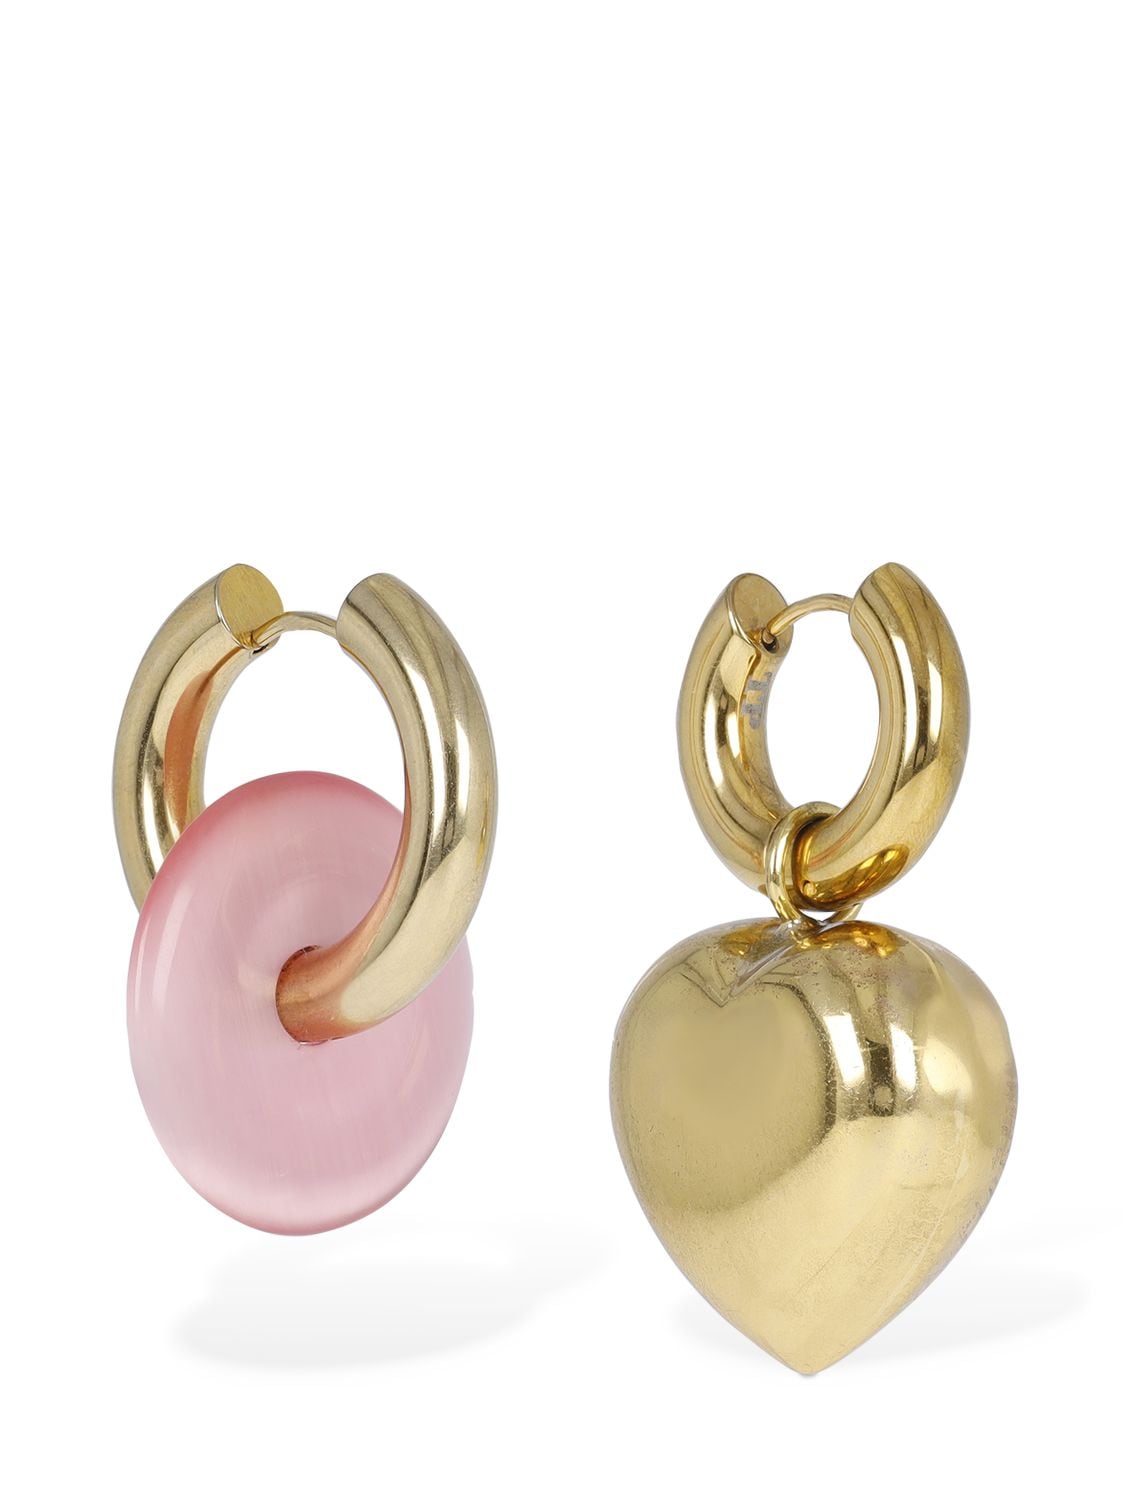 Image of Heart & Disc Mismatched Earrings